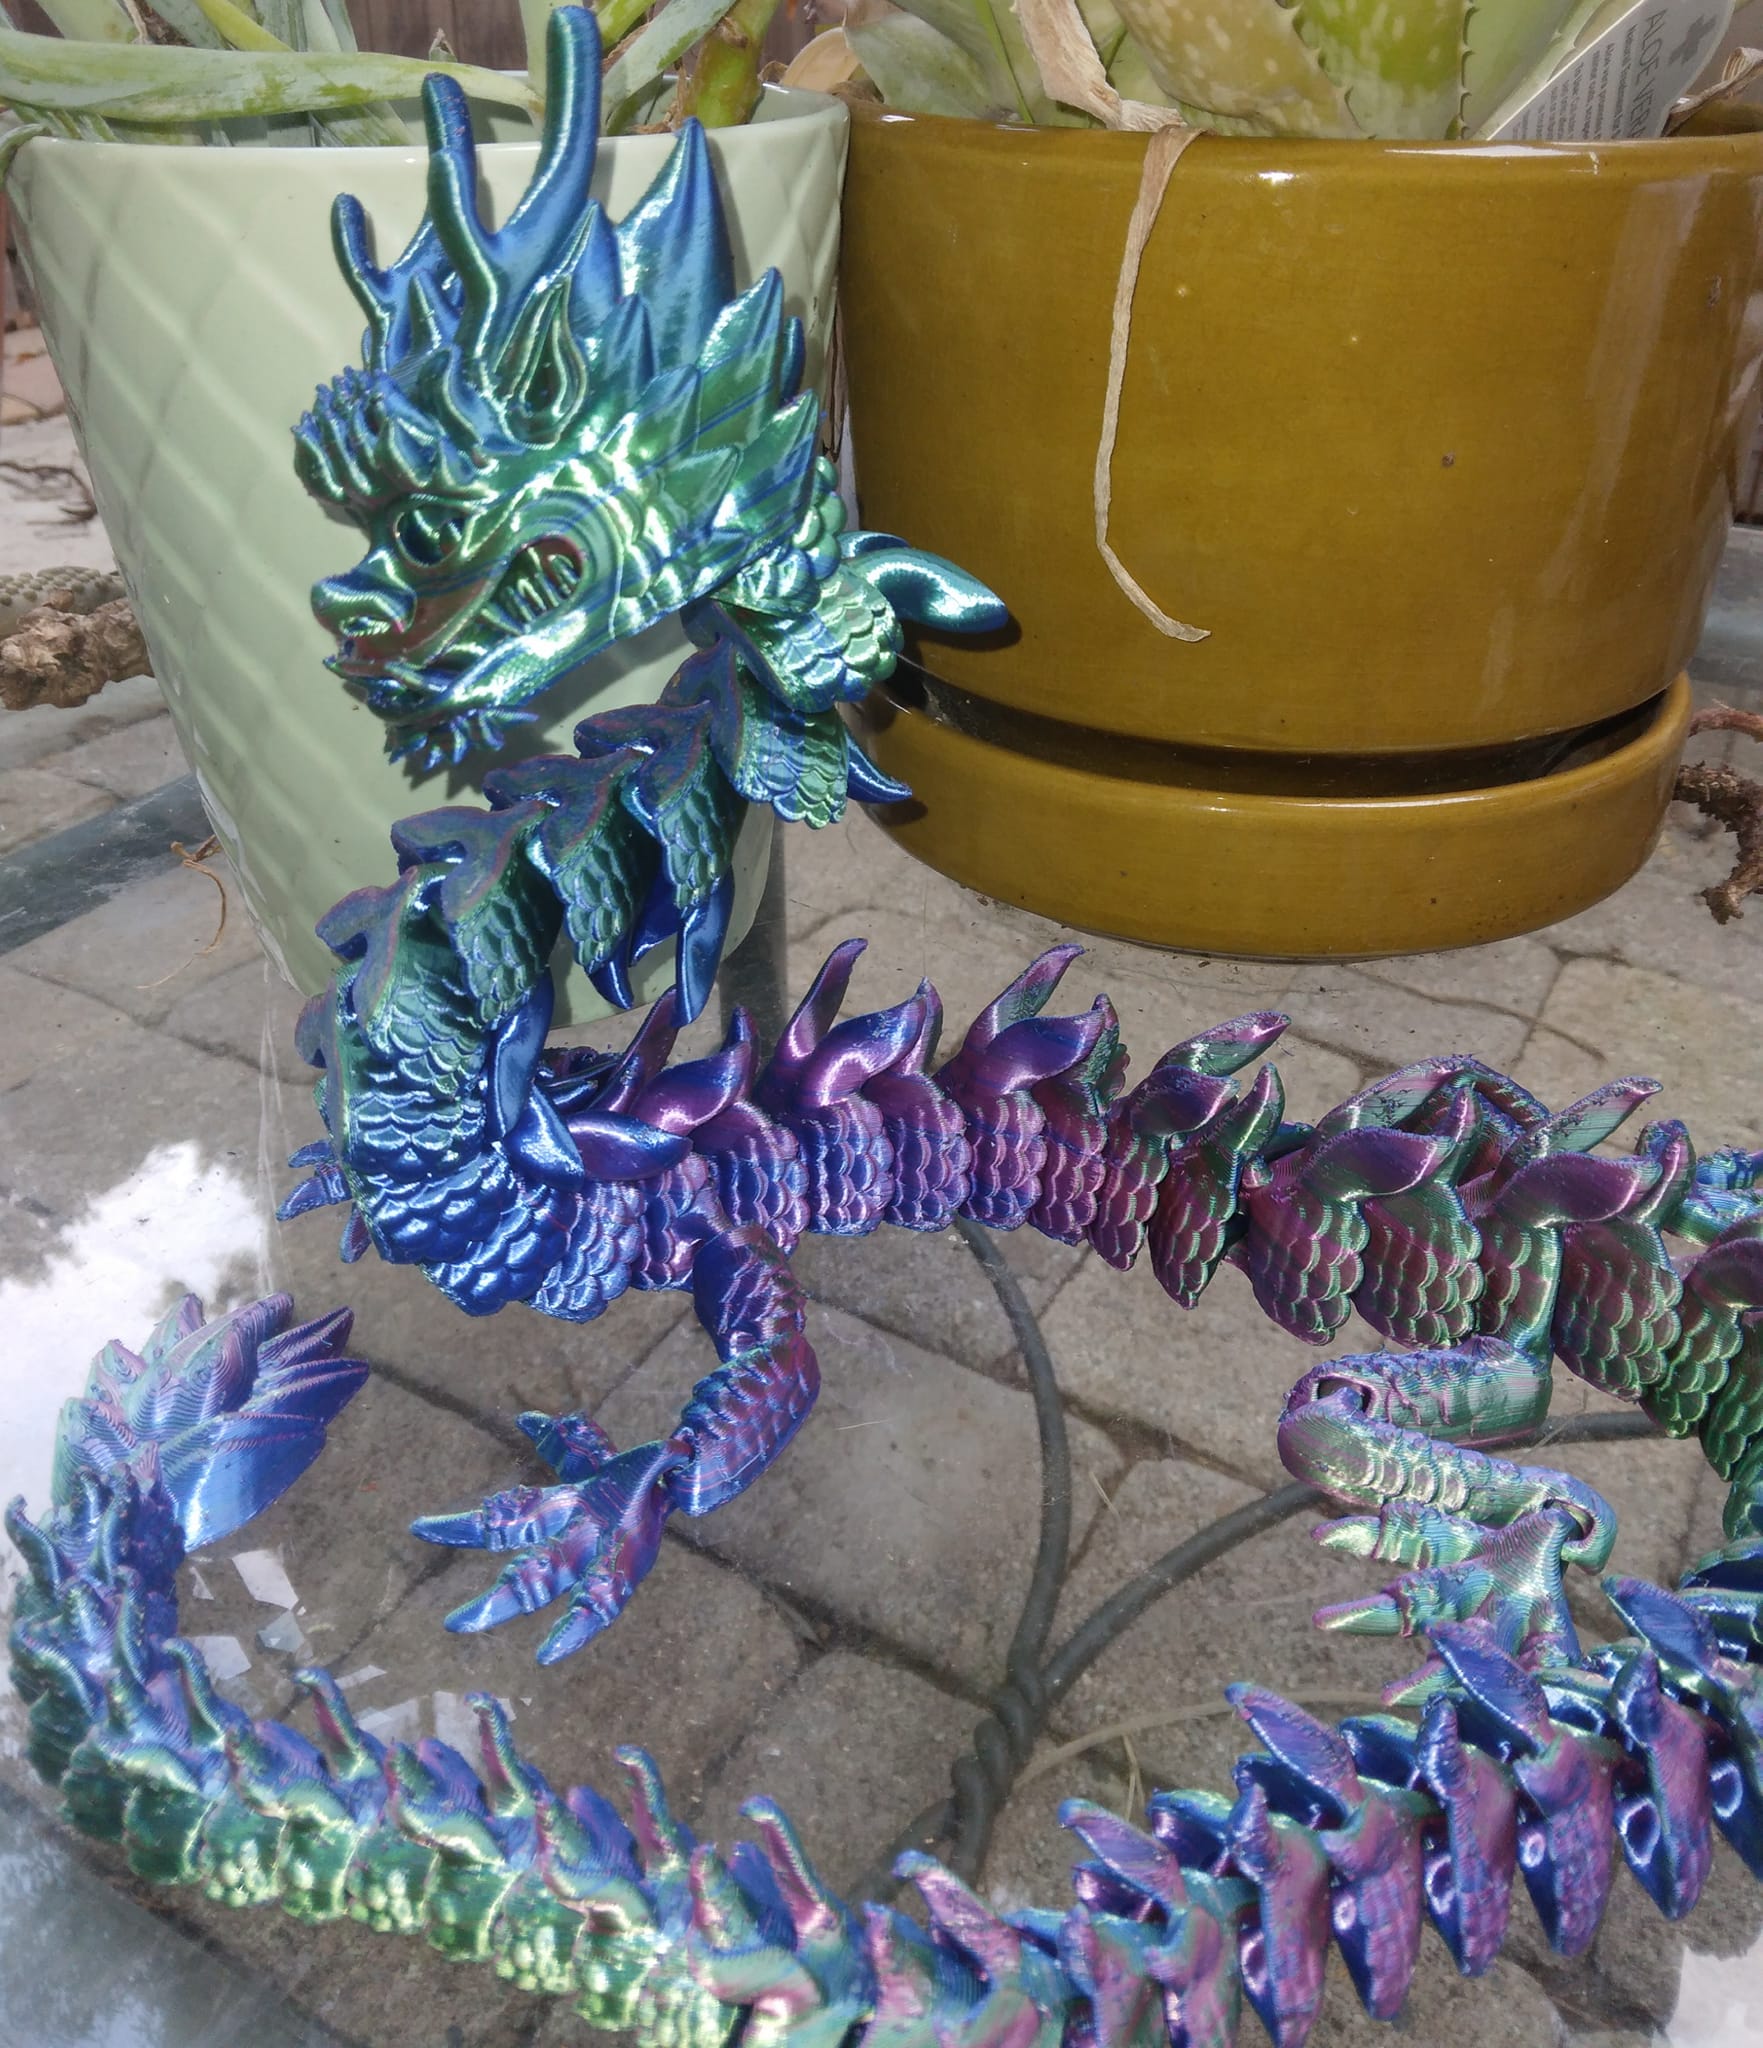 3D print Flexi Print-in-Place Imperial Dragon • made with Creality